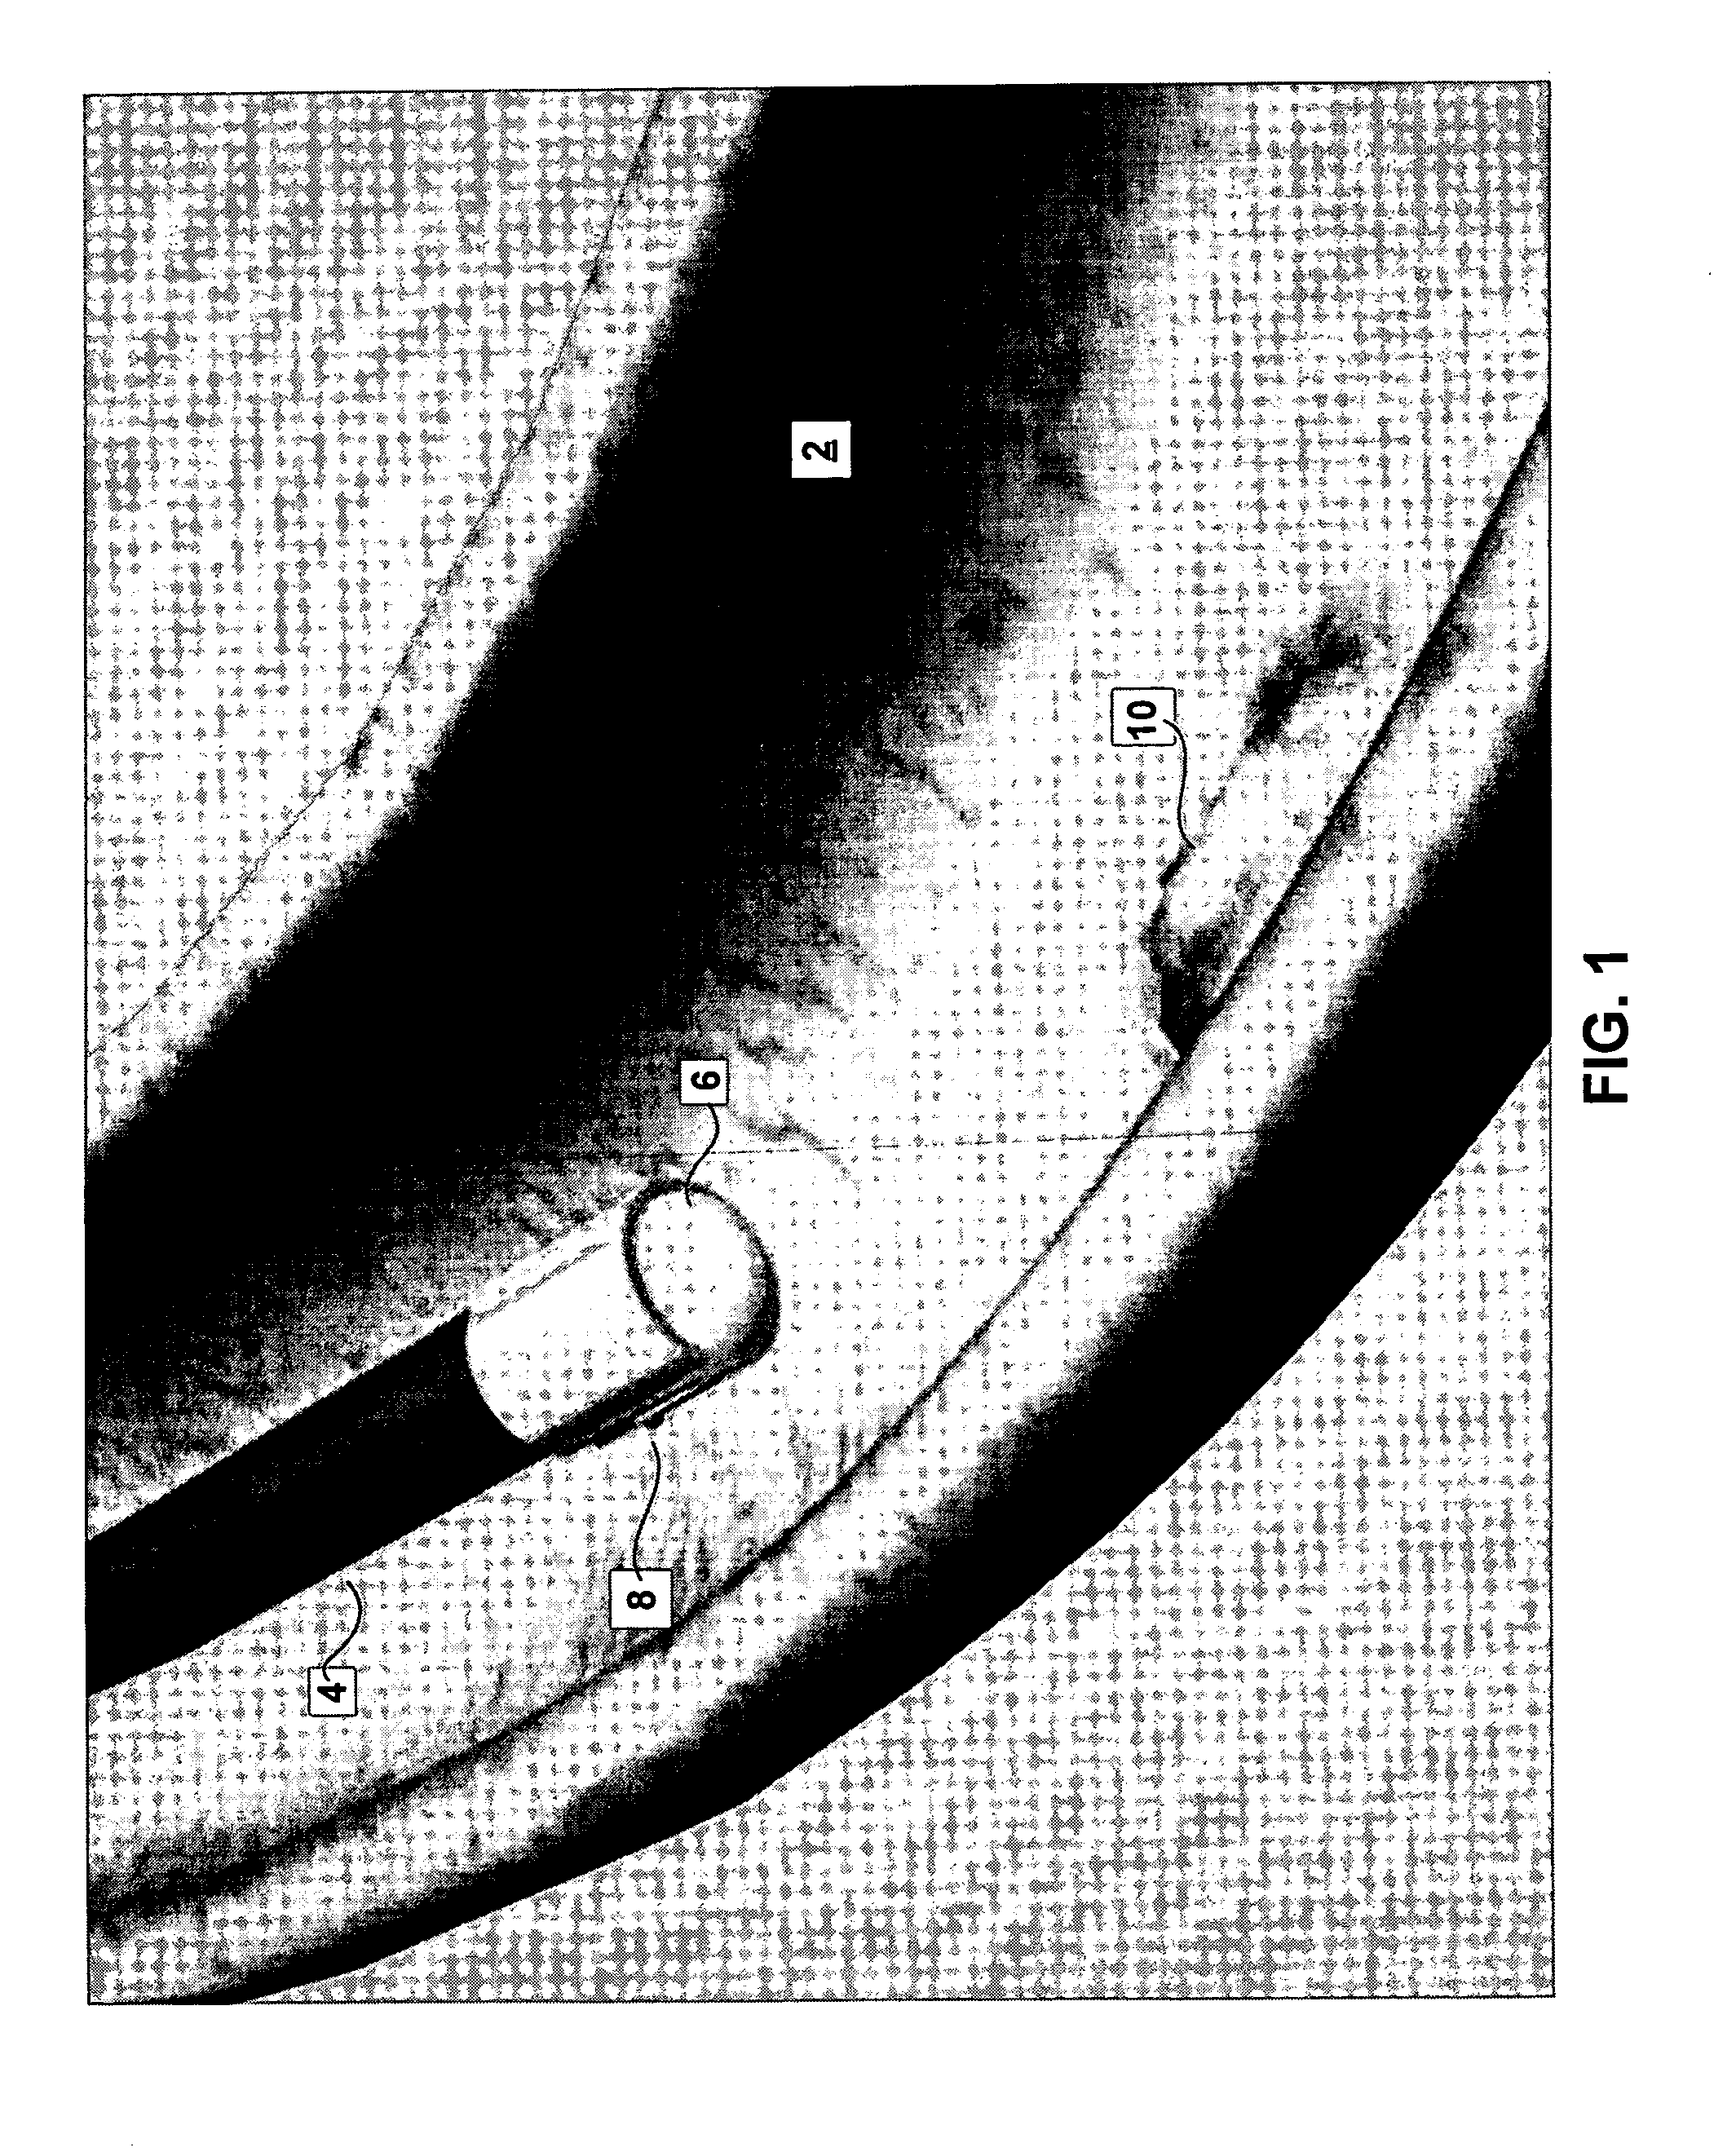 System and method for endoscopic measurement and mapping of internal organs, tumors and other objects